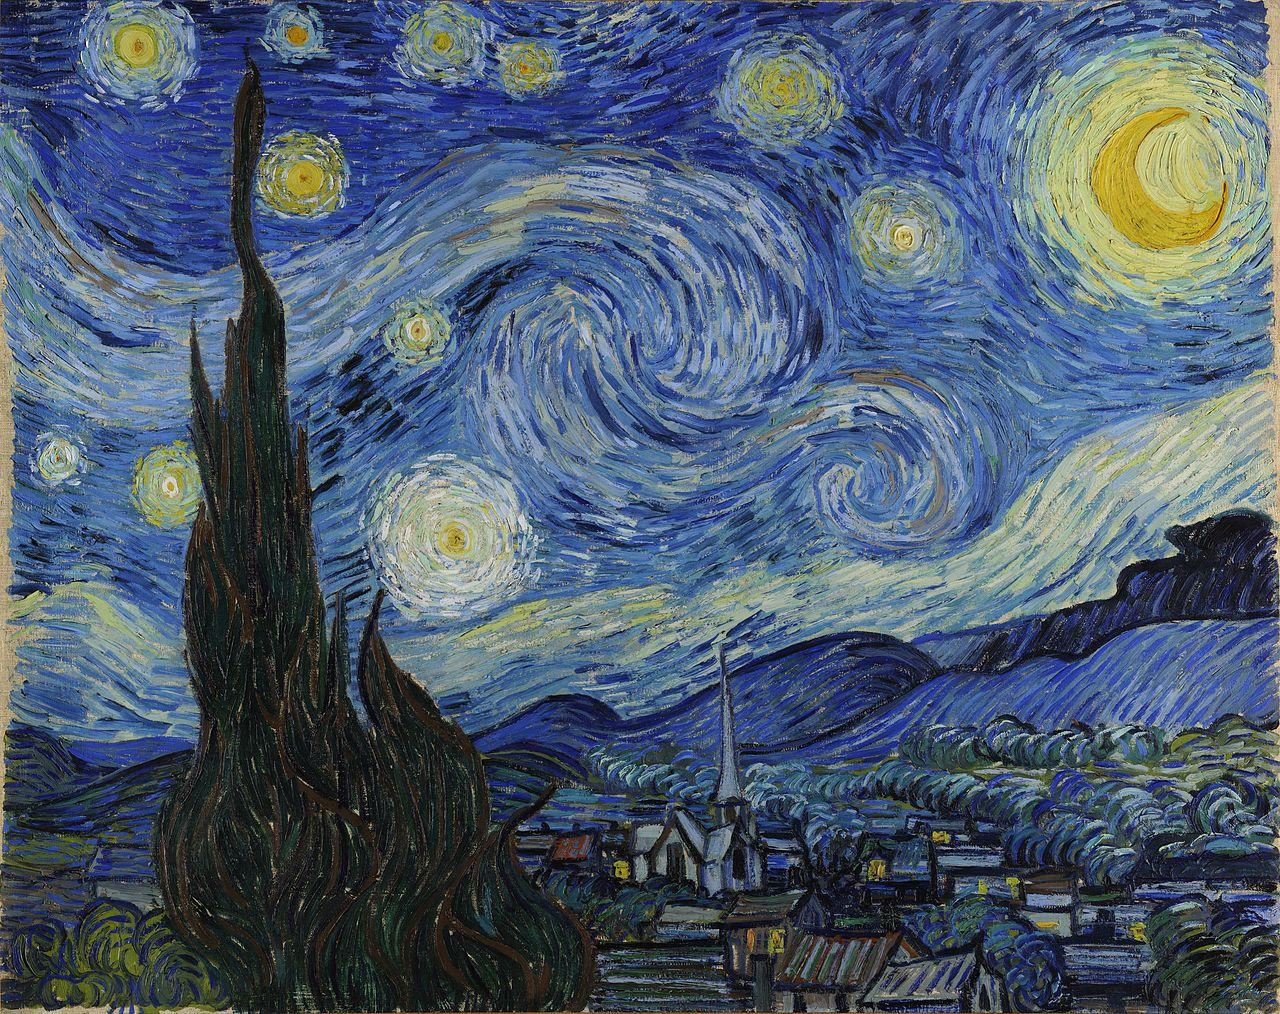 Van Gogh Starry Night Painting and The Story